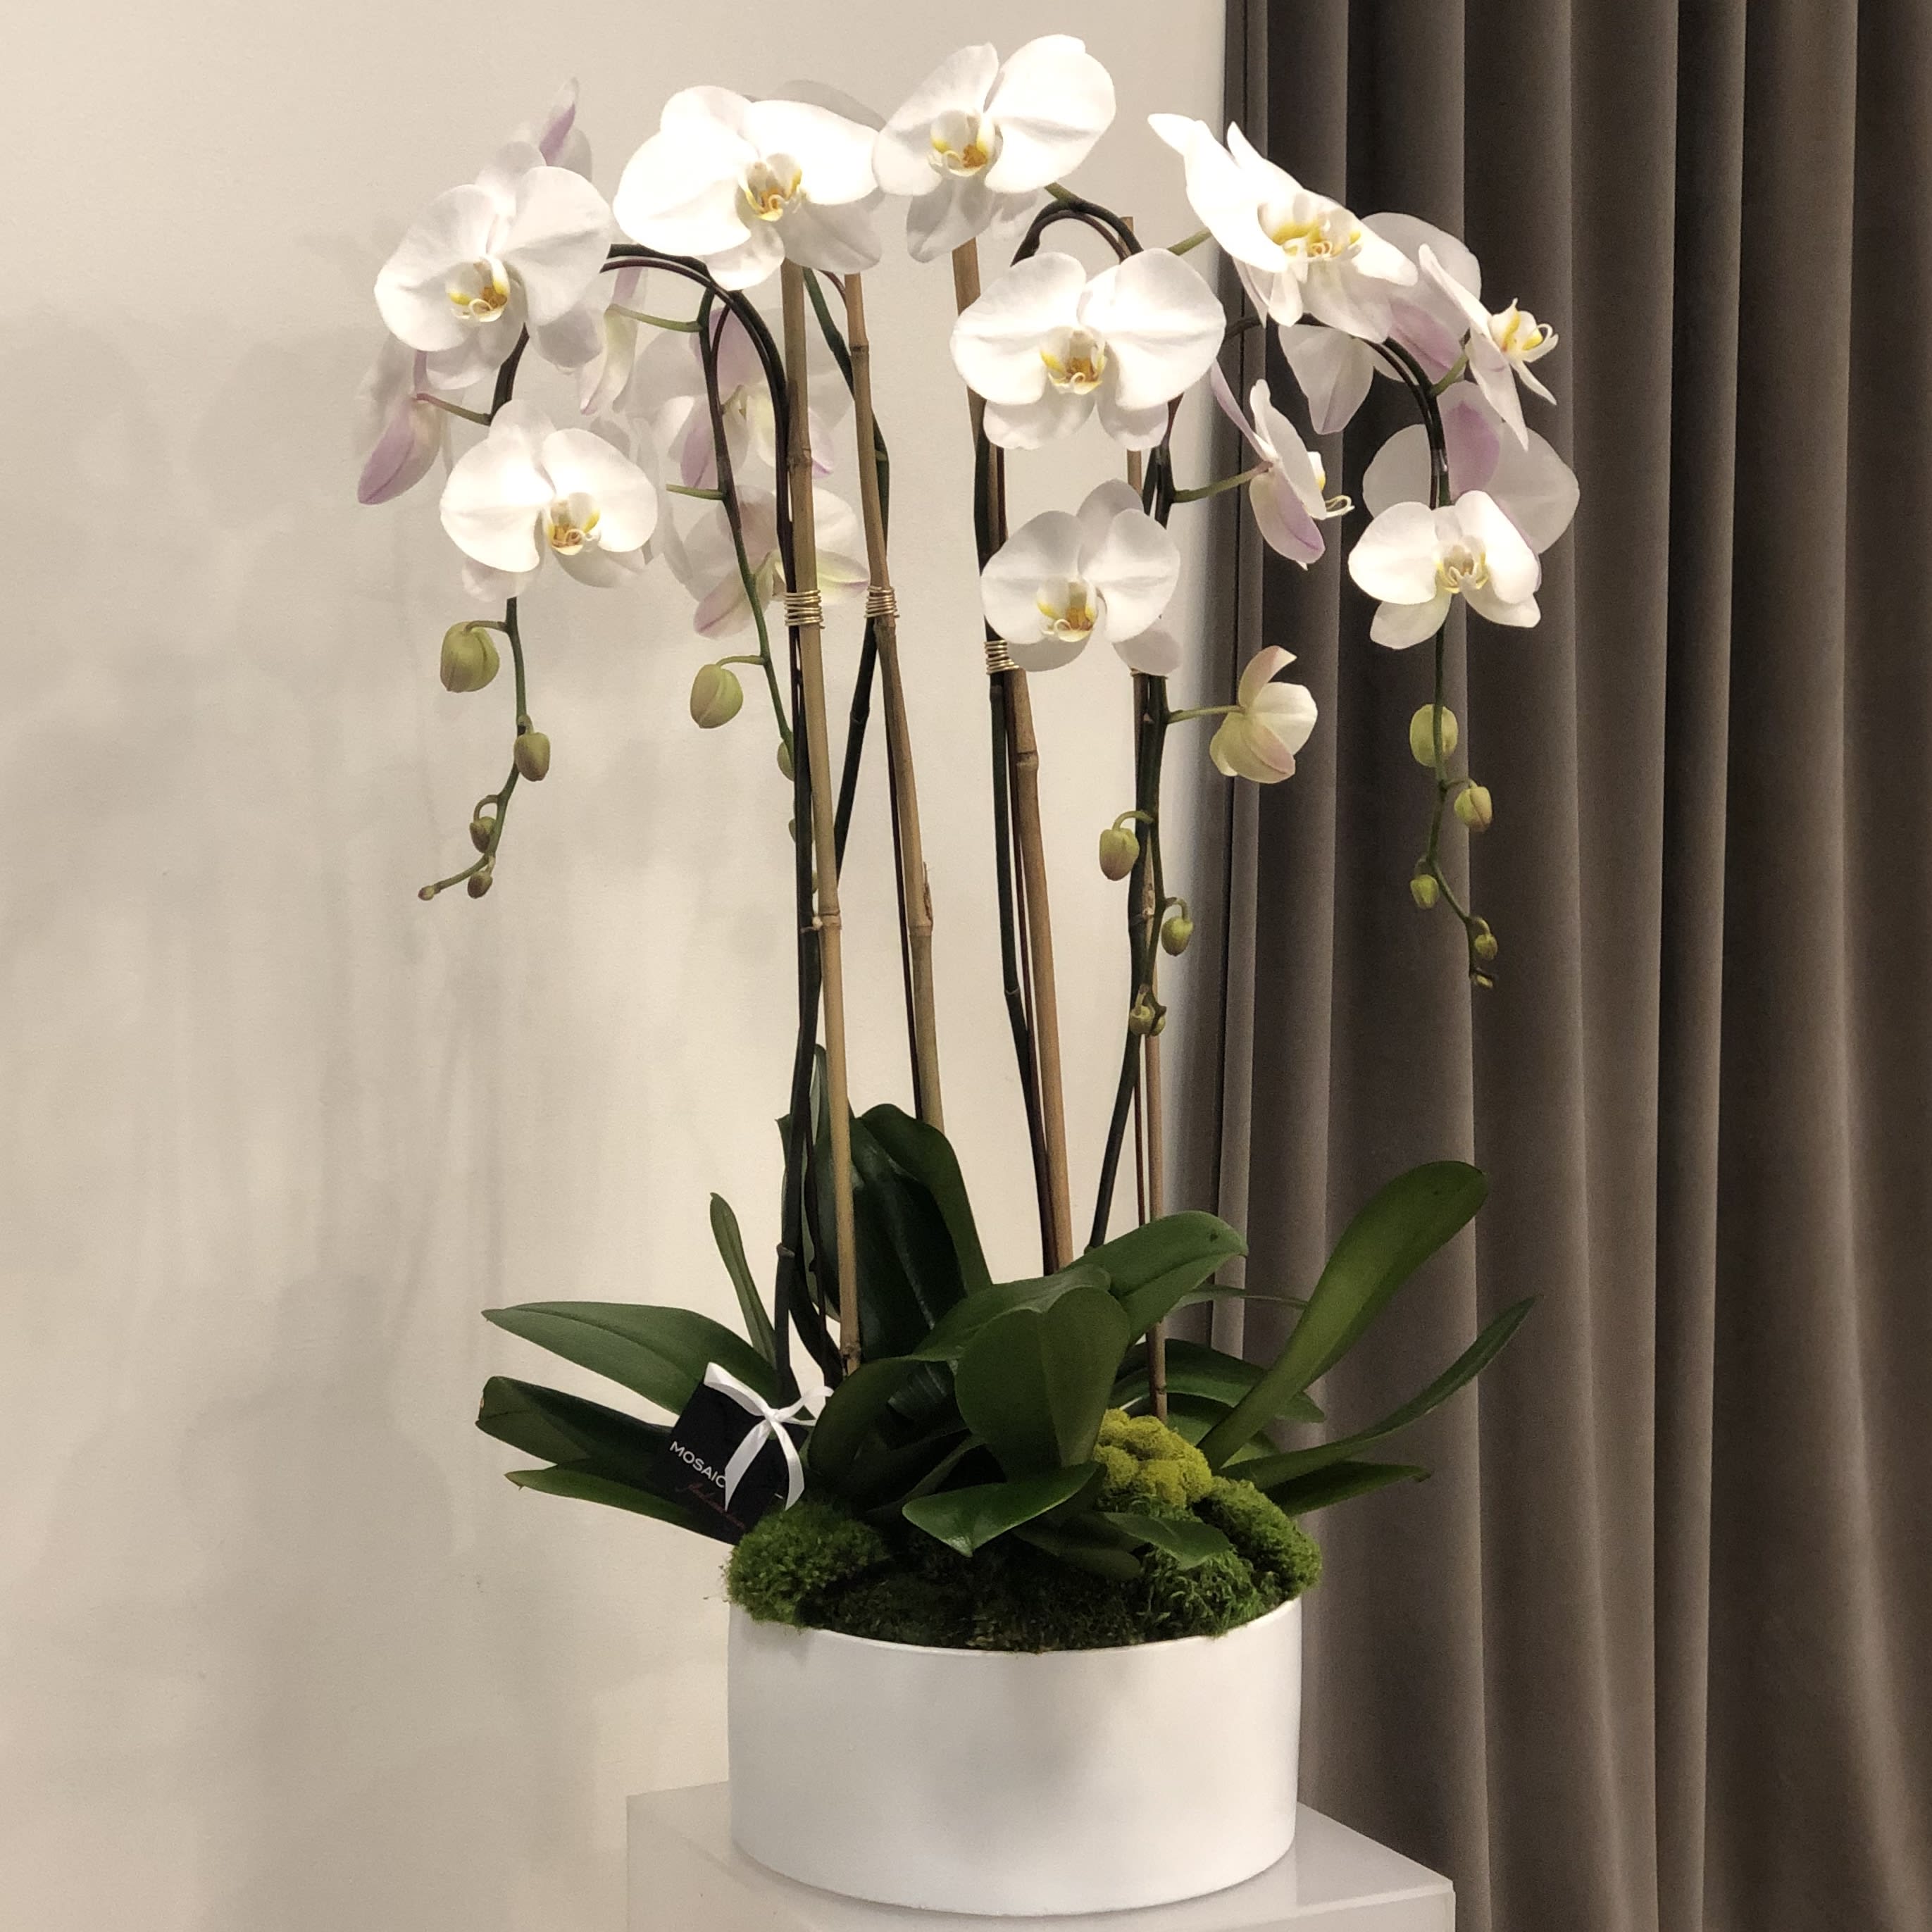 Petite White Orchid Blooming Houseplant | Plants for Delivery | The Sill